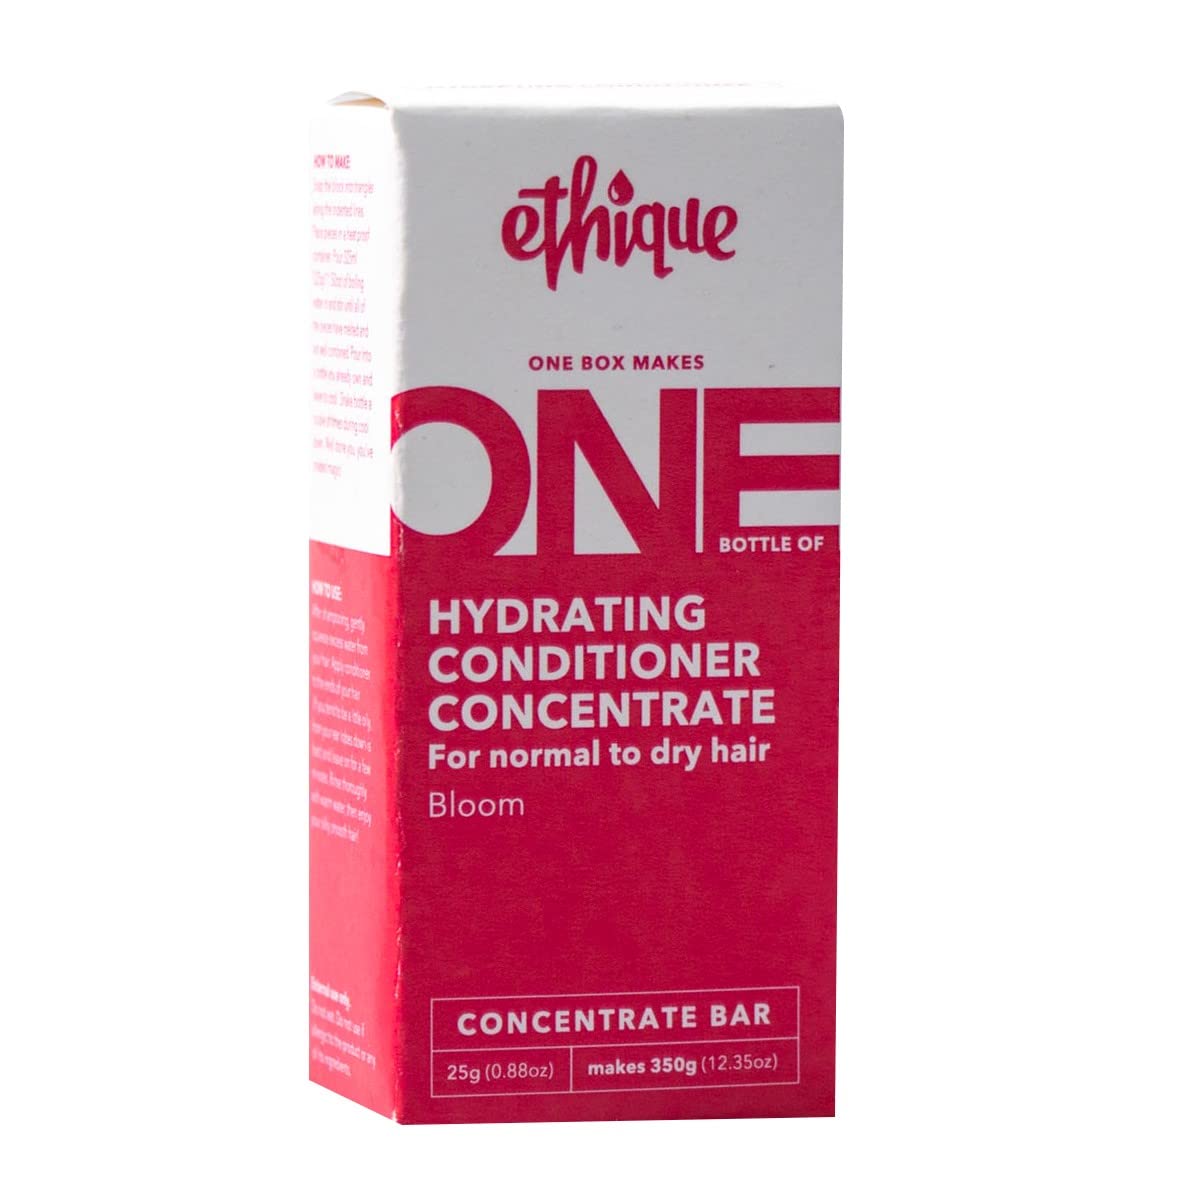 Ethique Hydrating Conditioner Concentrate for Balanced to Dry Hair - Bloom - Sulfate-Free, Plastic-Free, Vegan, Cruelty-Free, Eco-Friendly, Makes 11.83 fl oz Bottle of Conditioner (Pack of 1)